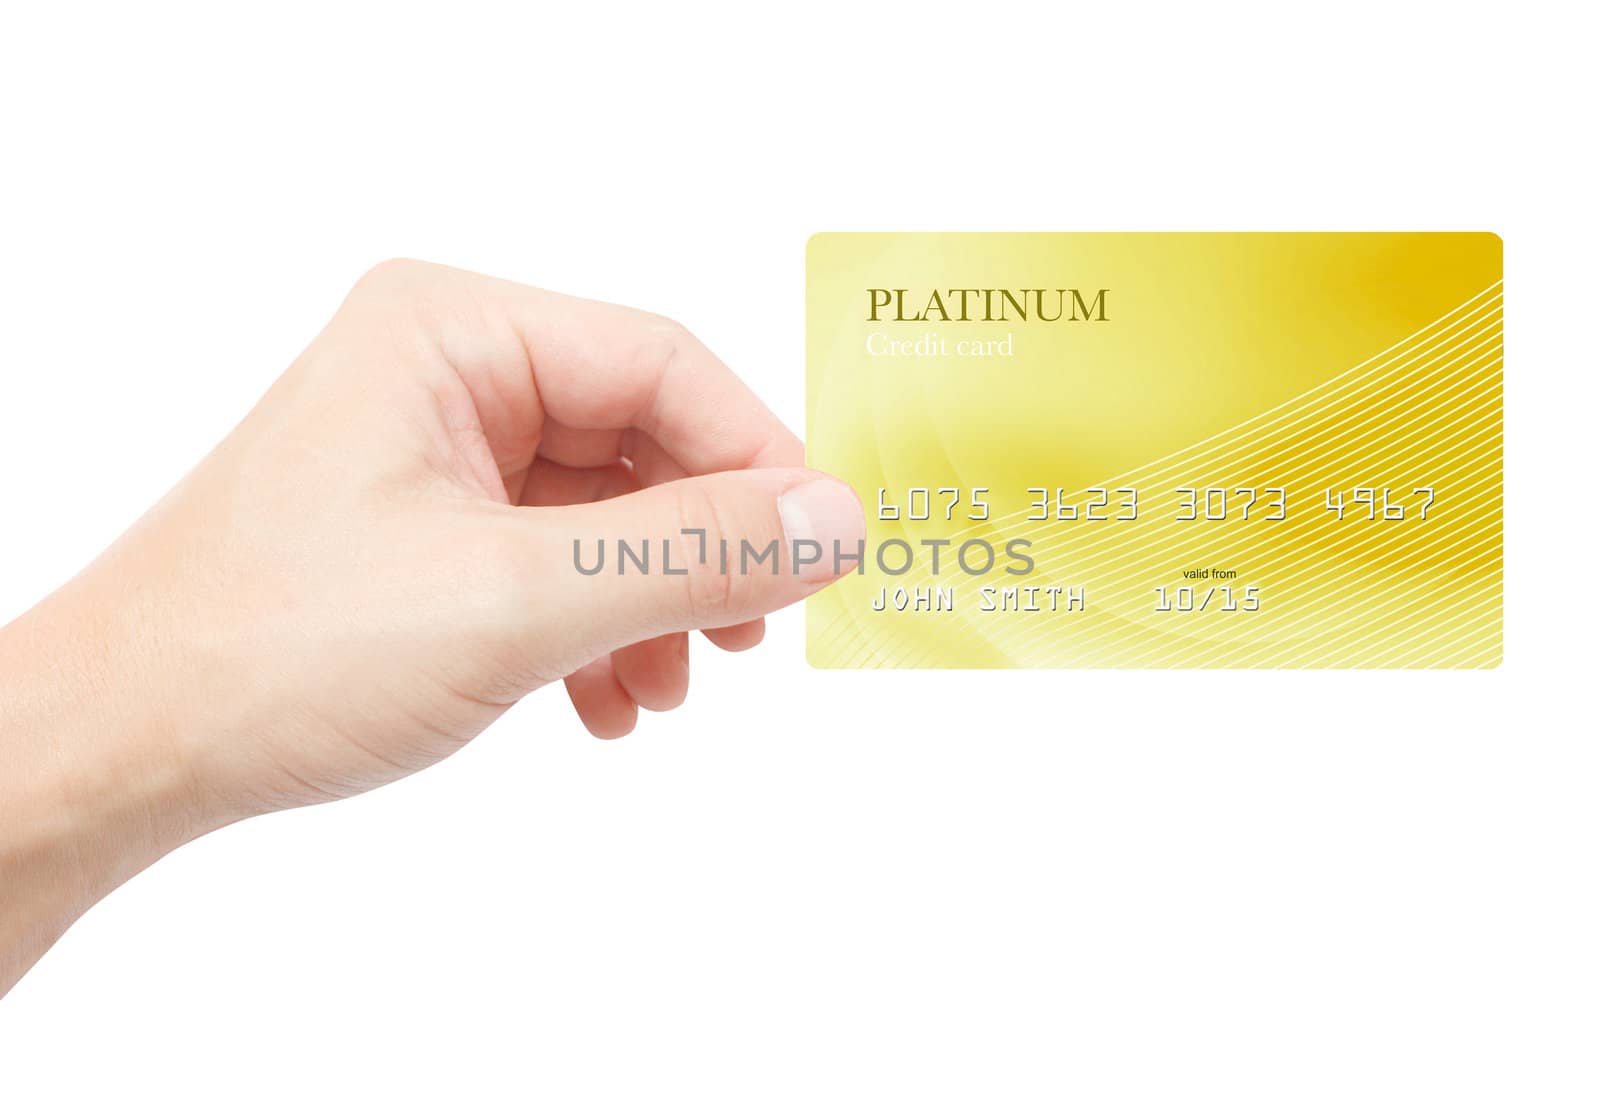 Holding credit card